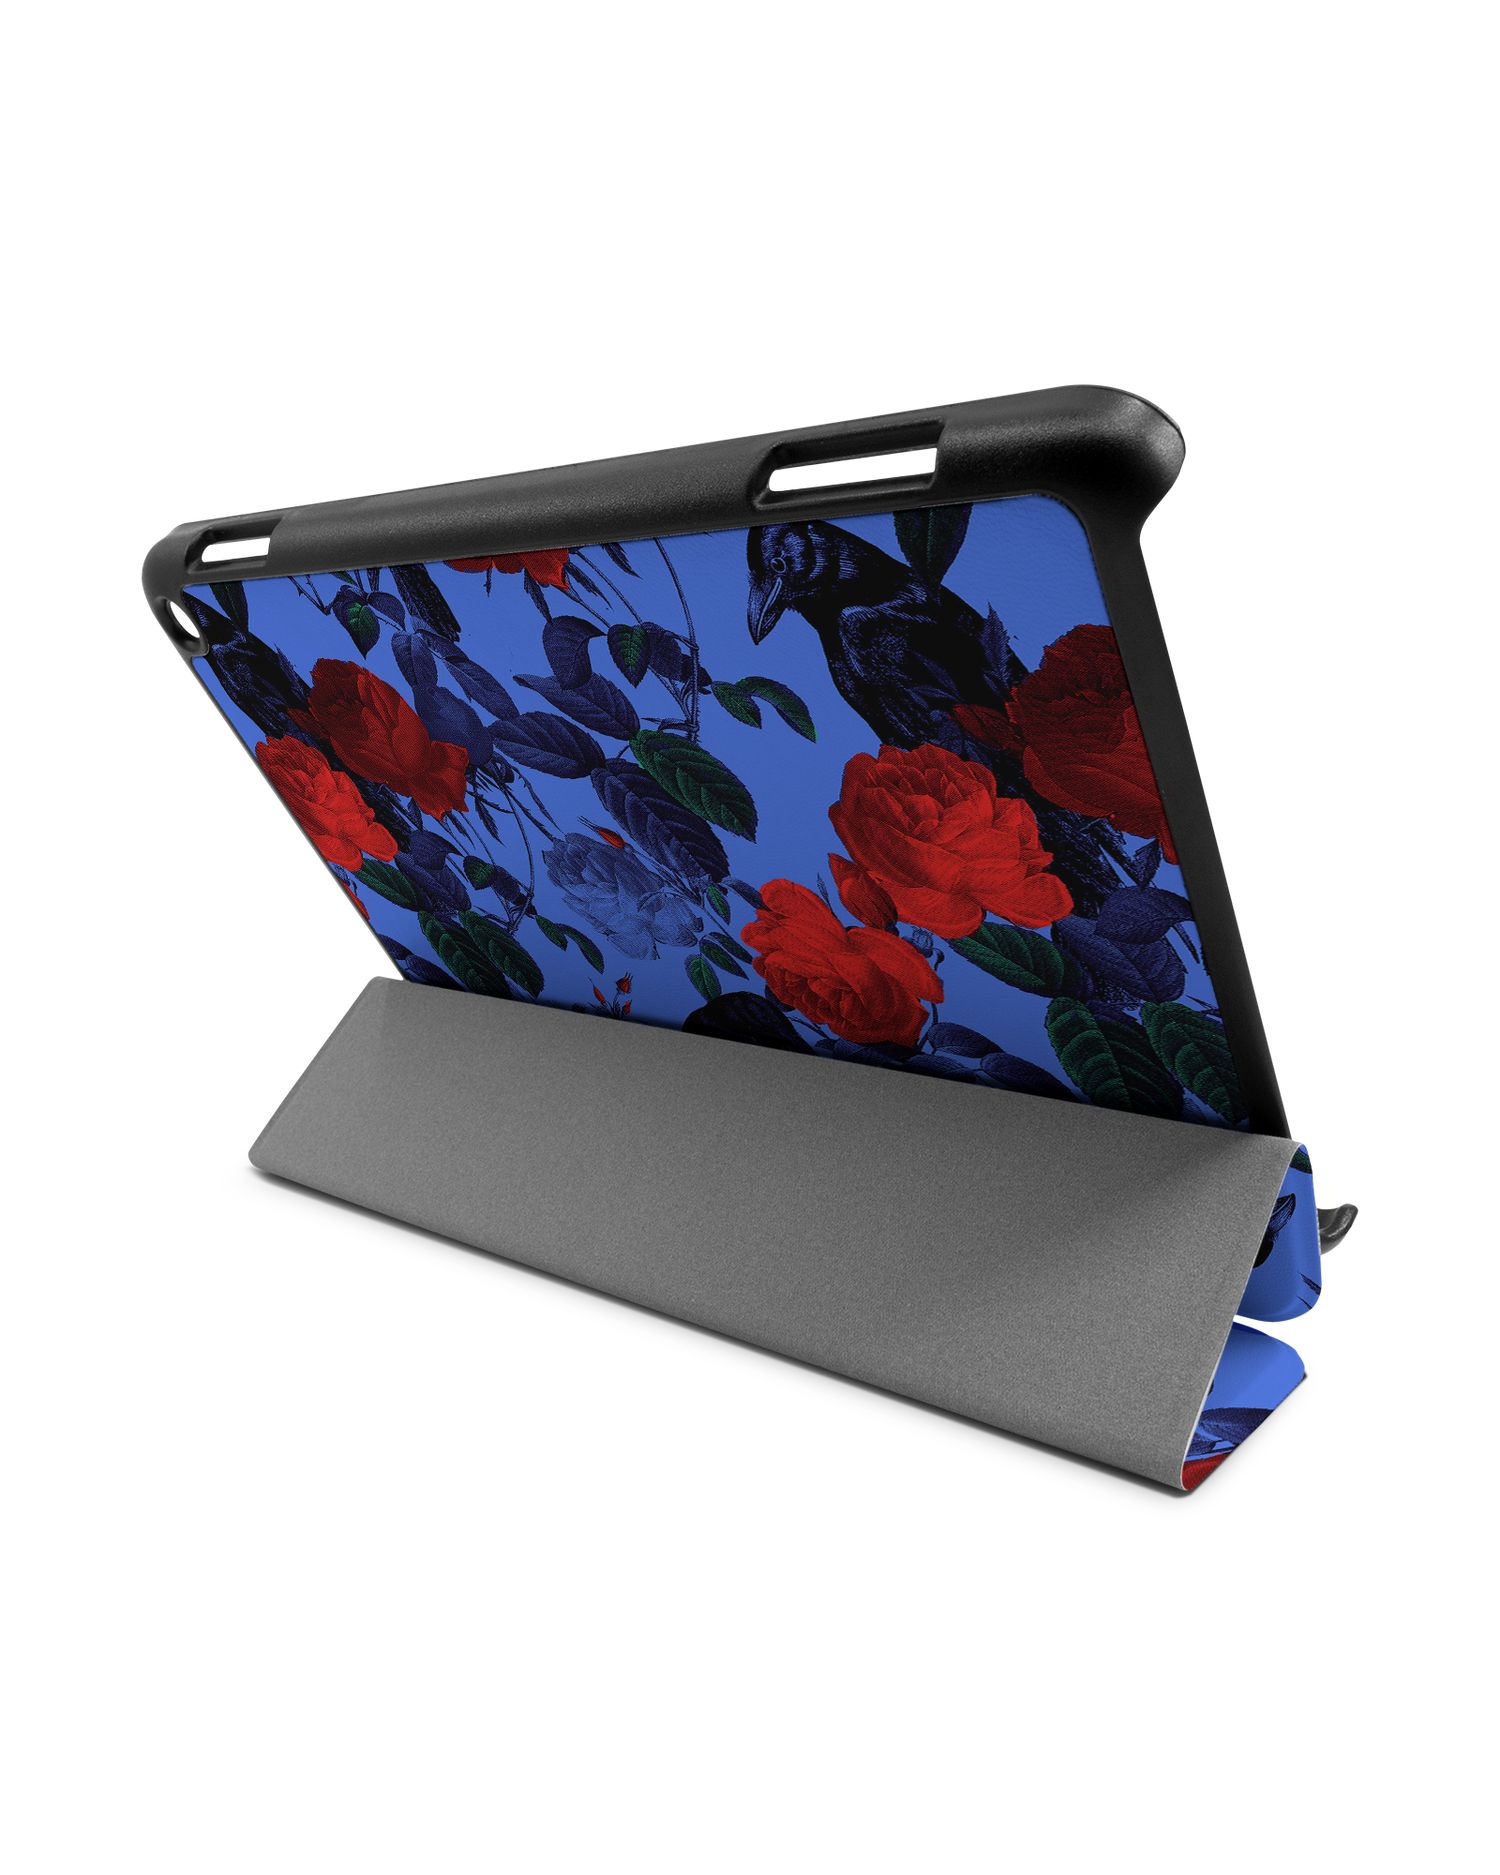 Roses And Ravens Tablet Smart Case for Amazon Fire HD 8 (2022), Amazon Fire HD 8 Plus (2022), Amazon Fire HD 8 (2020), Amazon Fire HD 8 Plus (2020): Used as Stand